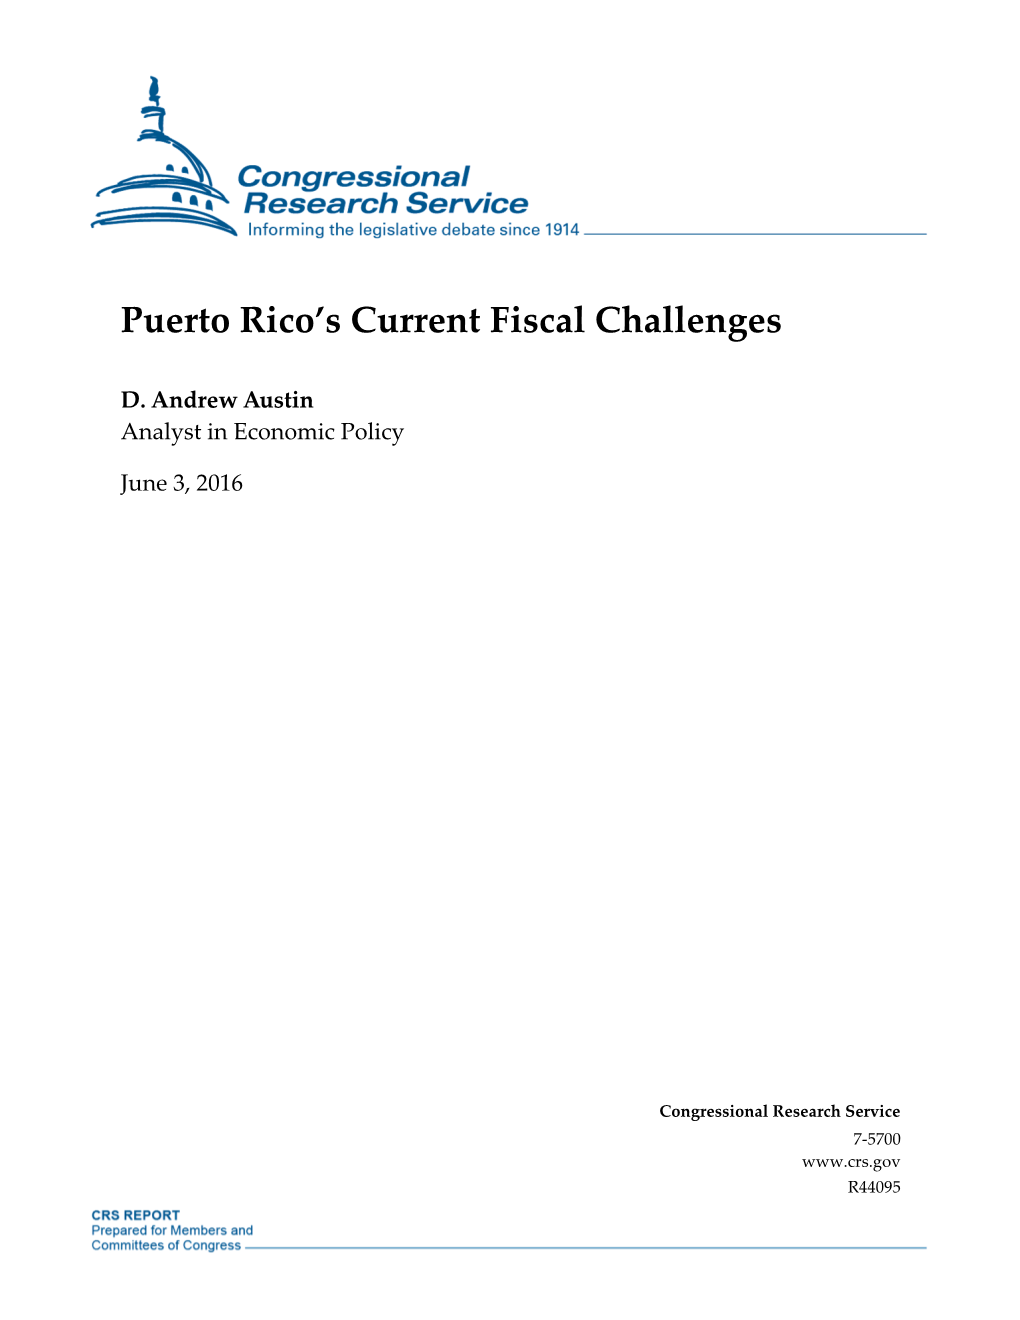 Puerto Rico's Current Fiscal Challenges